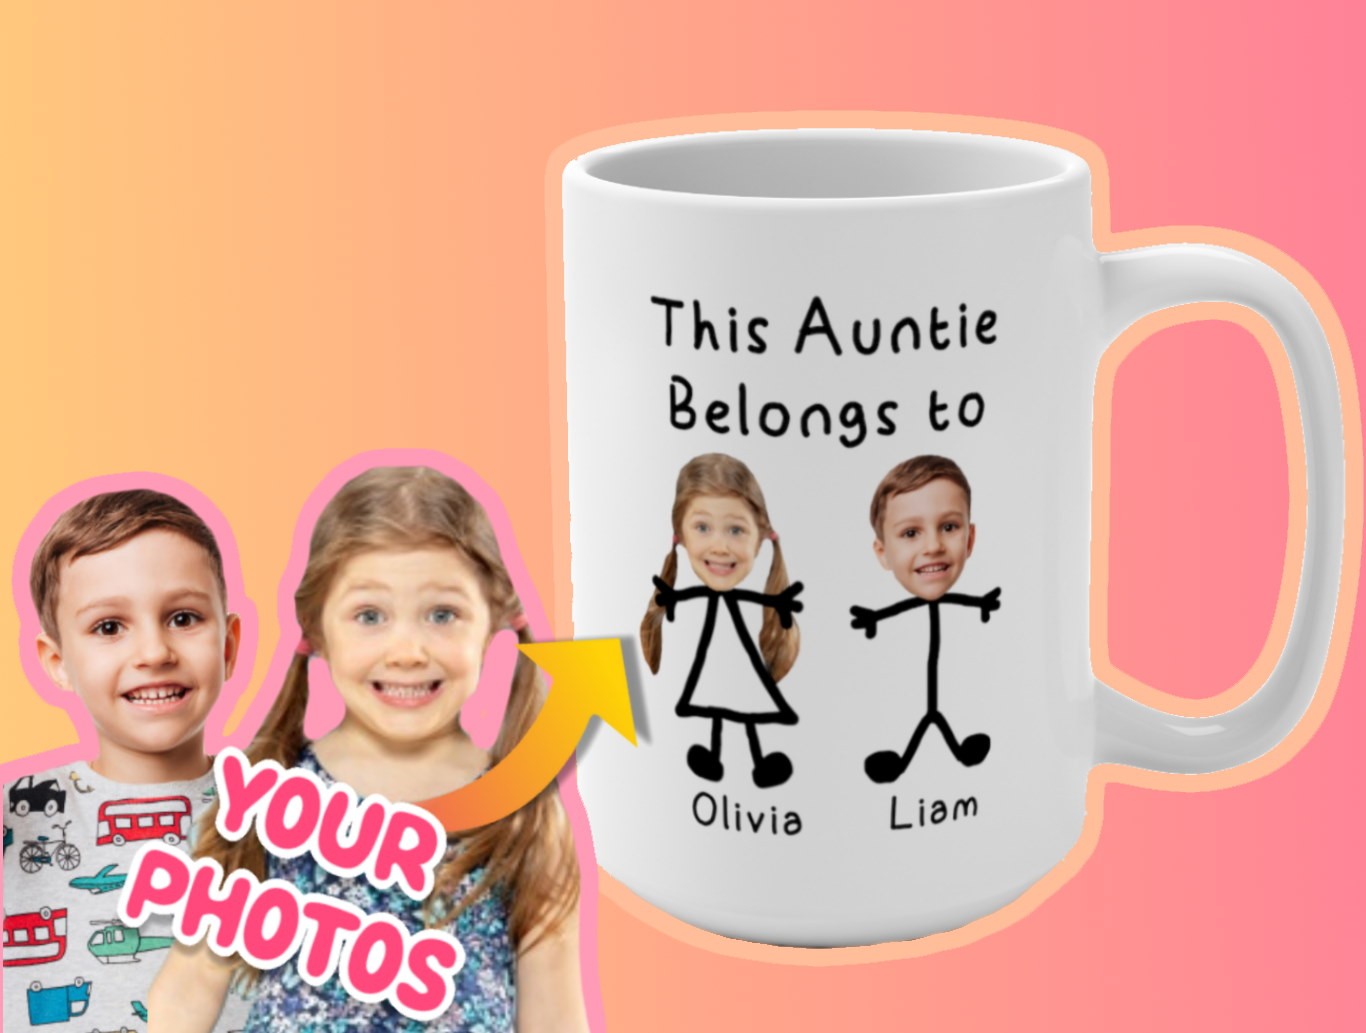 https://passionify.com/wp-content/uploads/2021/03/This-Auntie-Belongs-to-Custom-Kids-Photo-Mug-Gift-for-Aunts-Birthday-from-Niece-or-Nephew-Personalized-Coffee-Mug-for-Auntie-2.jpg